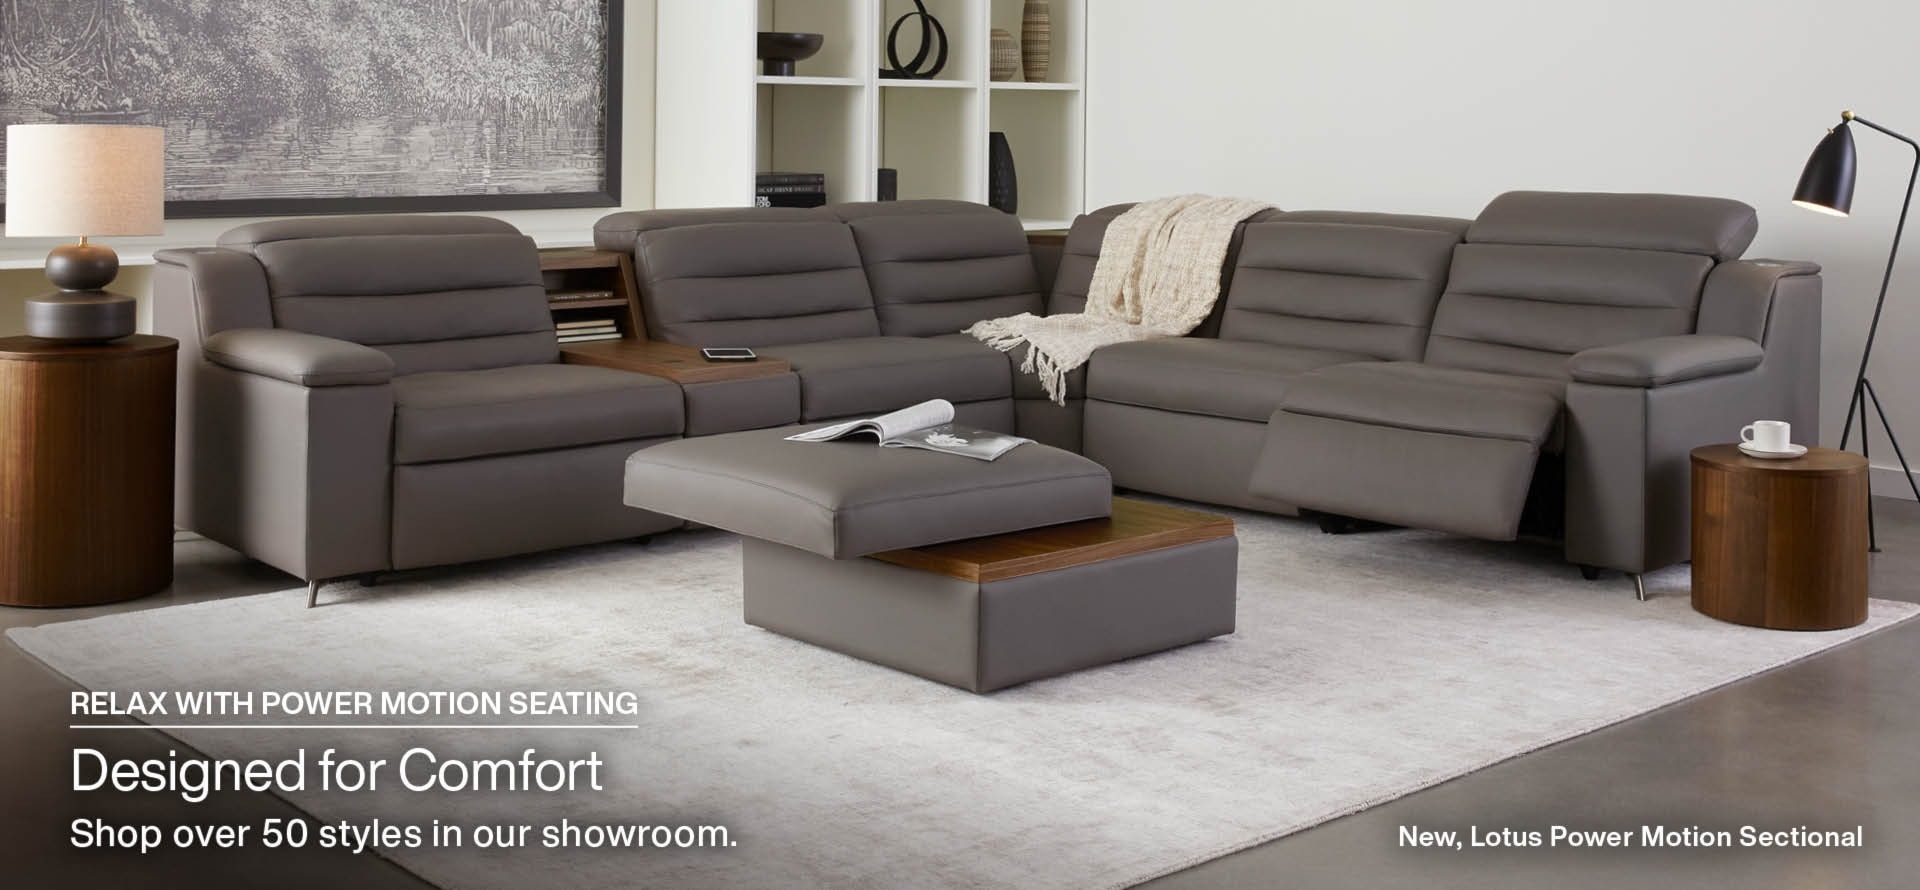 Relax with Power Motion Seating, Designed for Comfort, Shop over 50 Styles in our showroom, new Lotus Power Motion Sectional